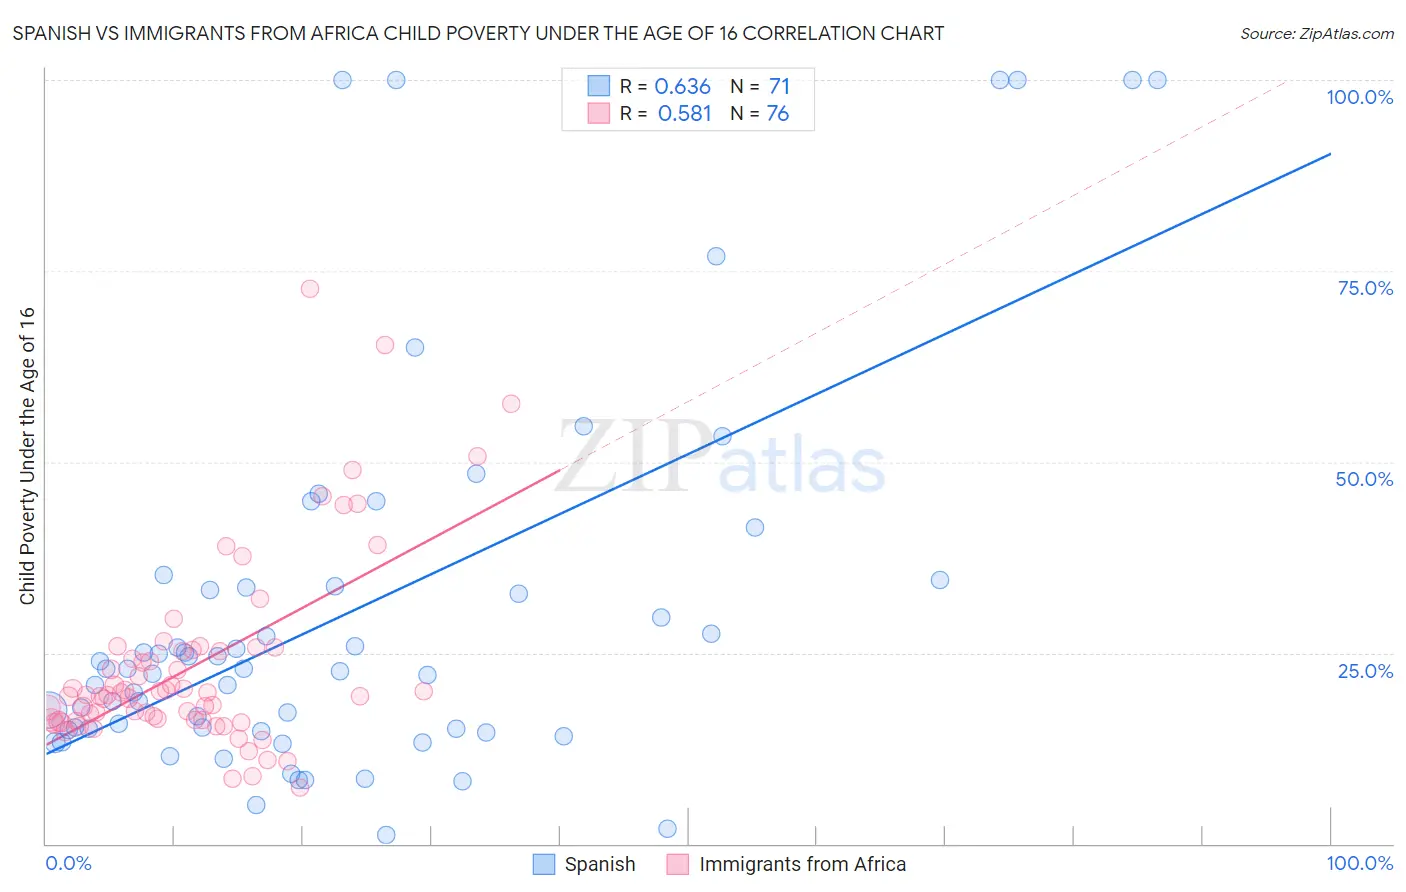 Spanish vs Immigrants from Africa Child Poverty Under the Age of 16